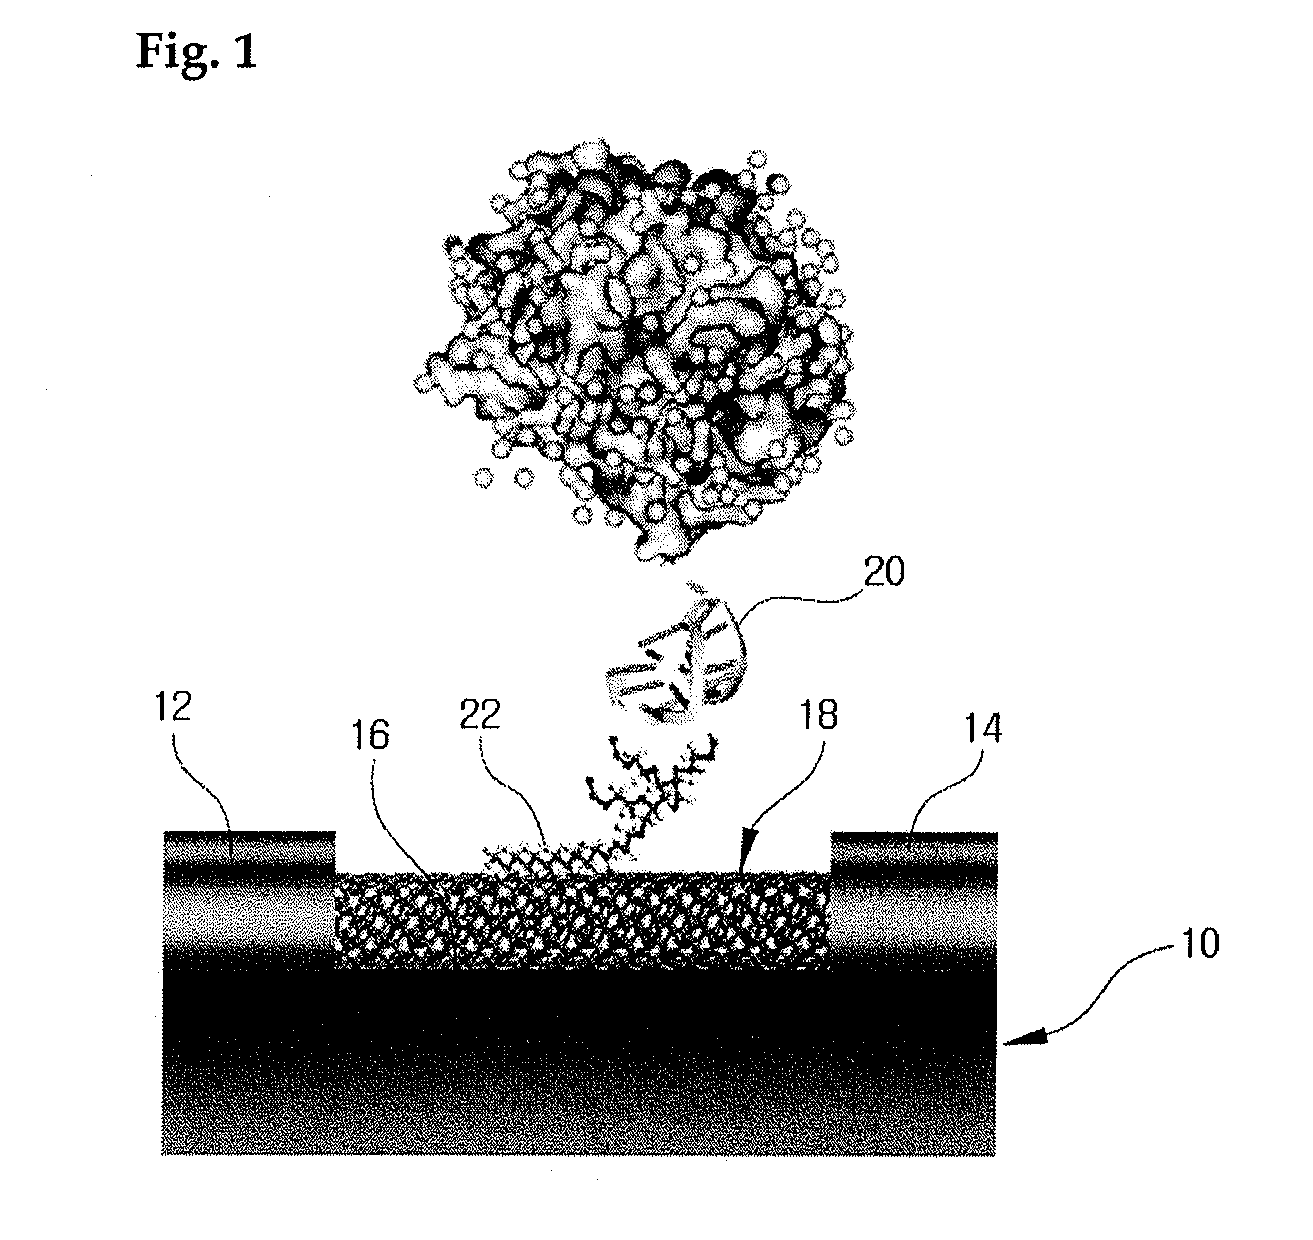 Carbon nanotube biosensors with aptamers as molecular recognition elements and method for sensing target material using the same